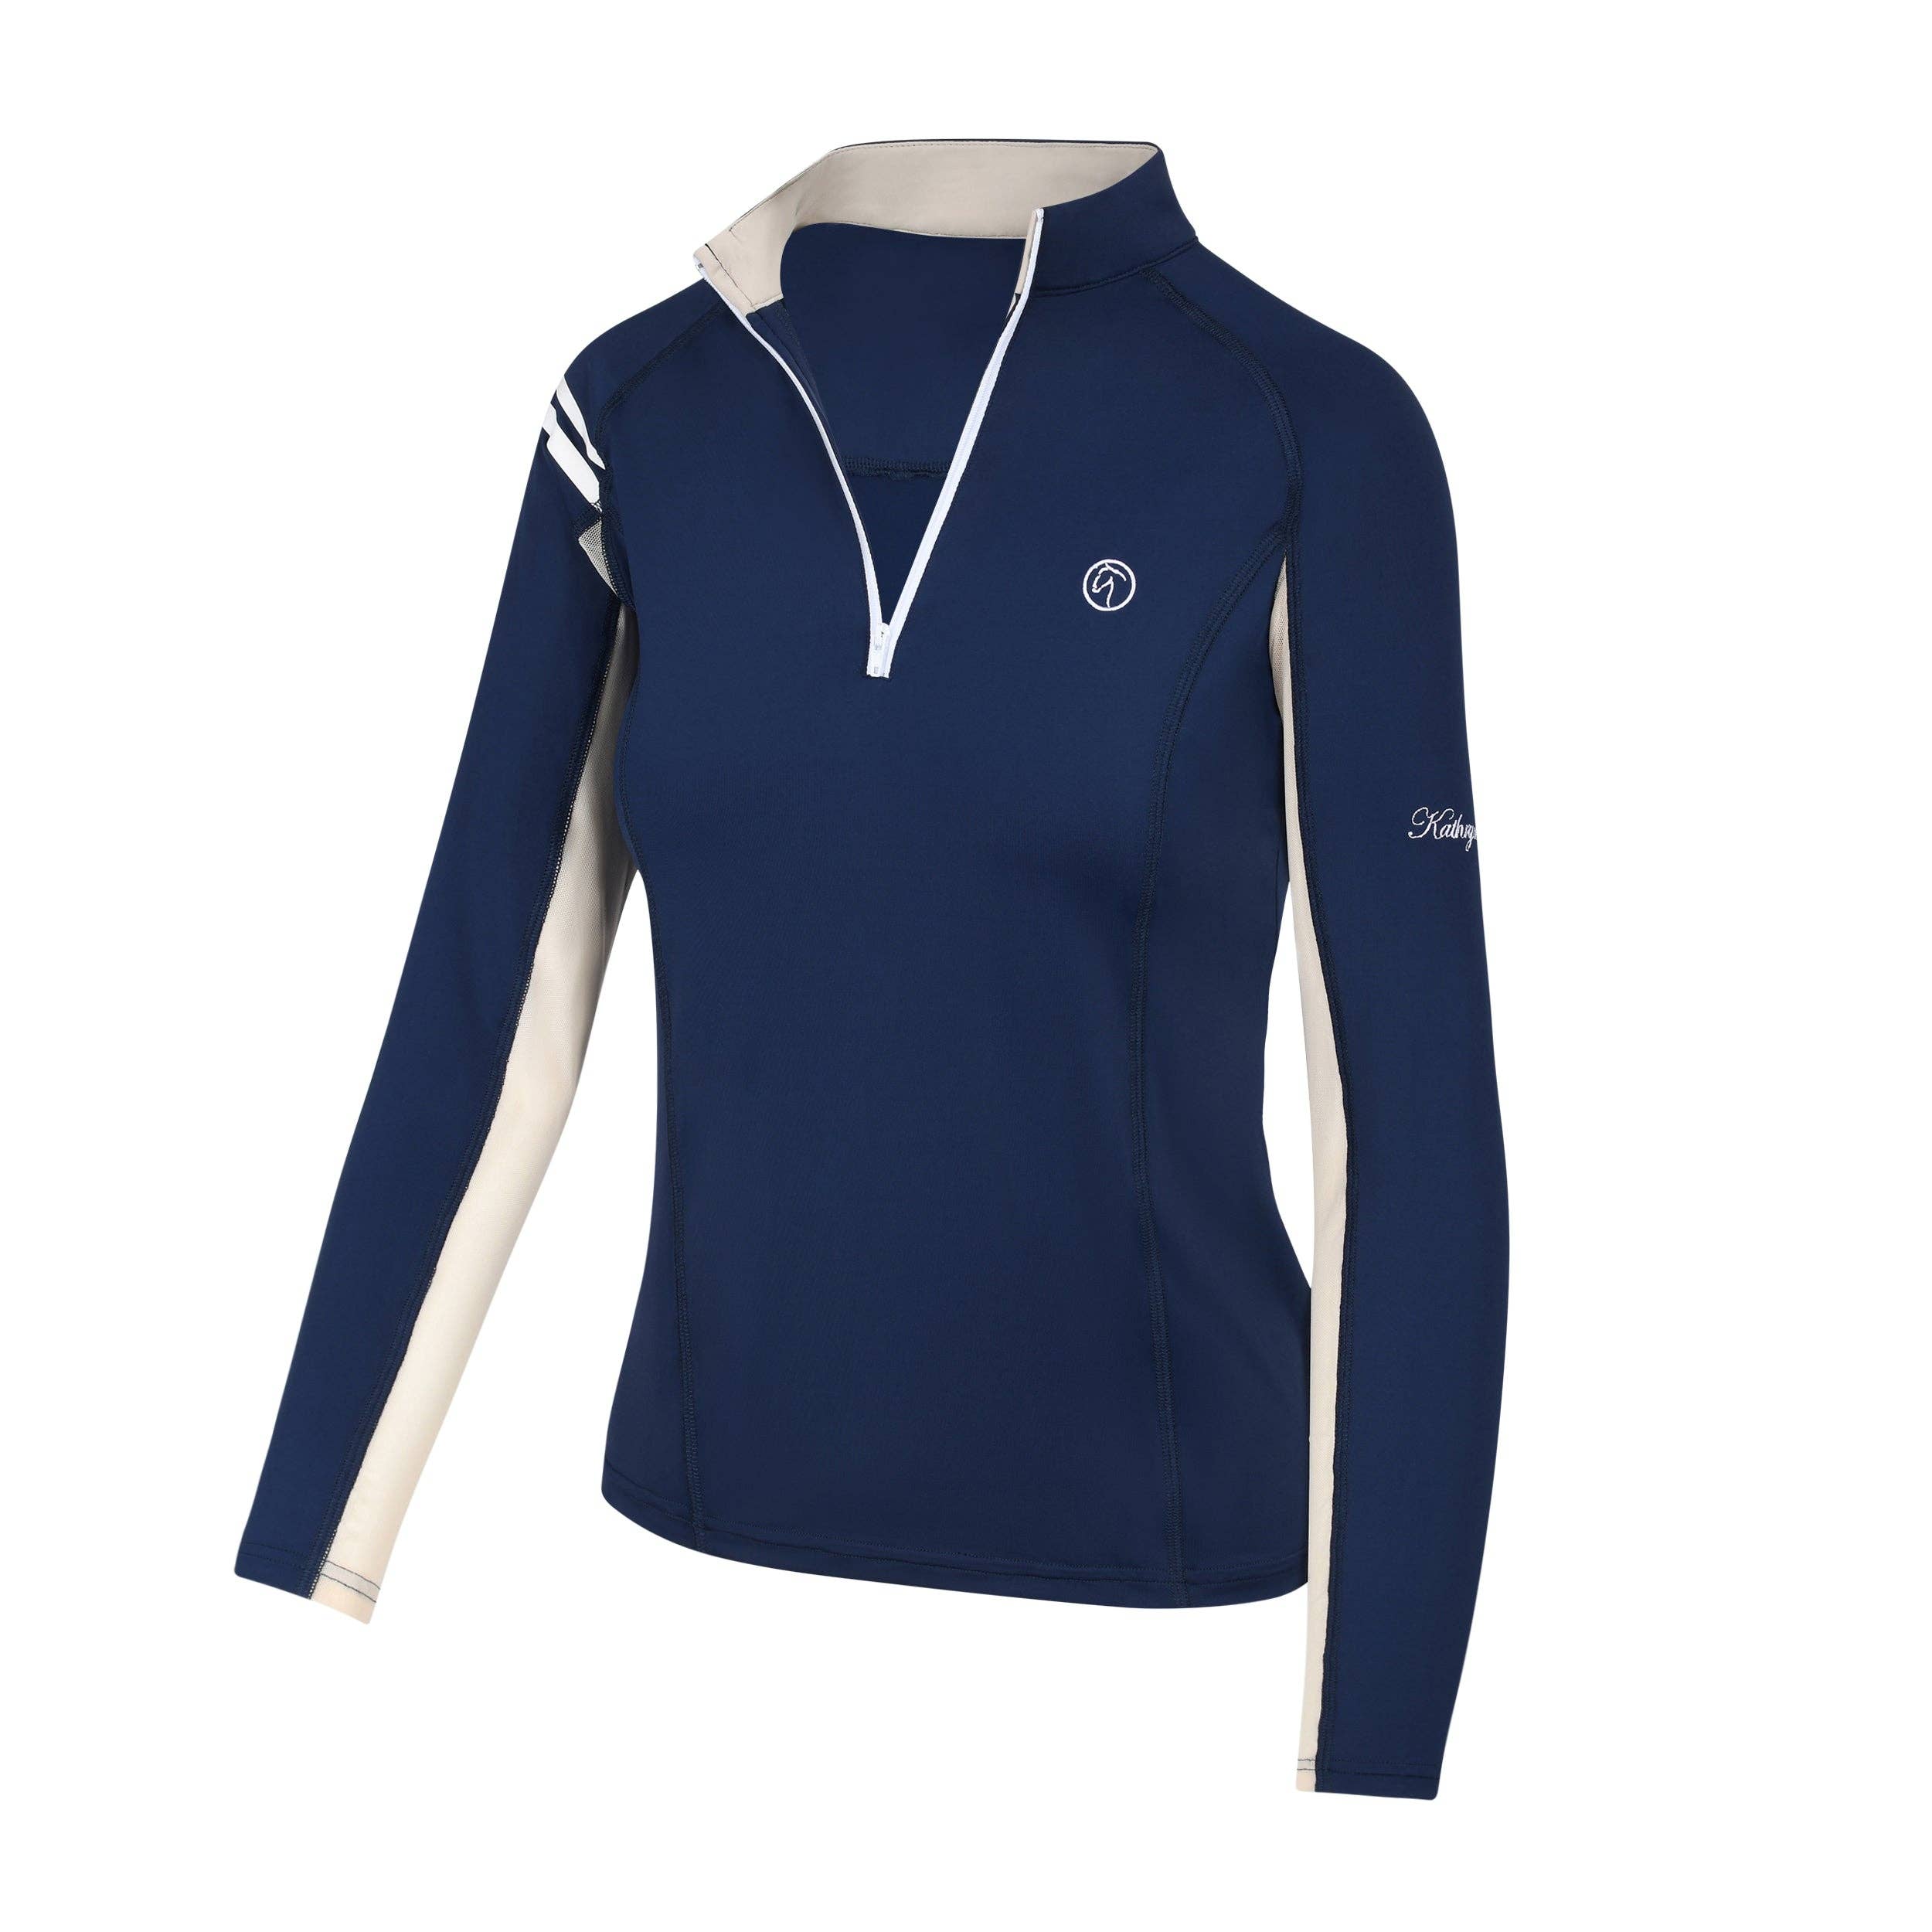 Kathryn Lily Equestrian - ProAir3 Sunshirt- Navy with Tan/White